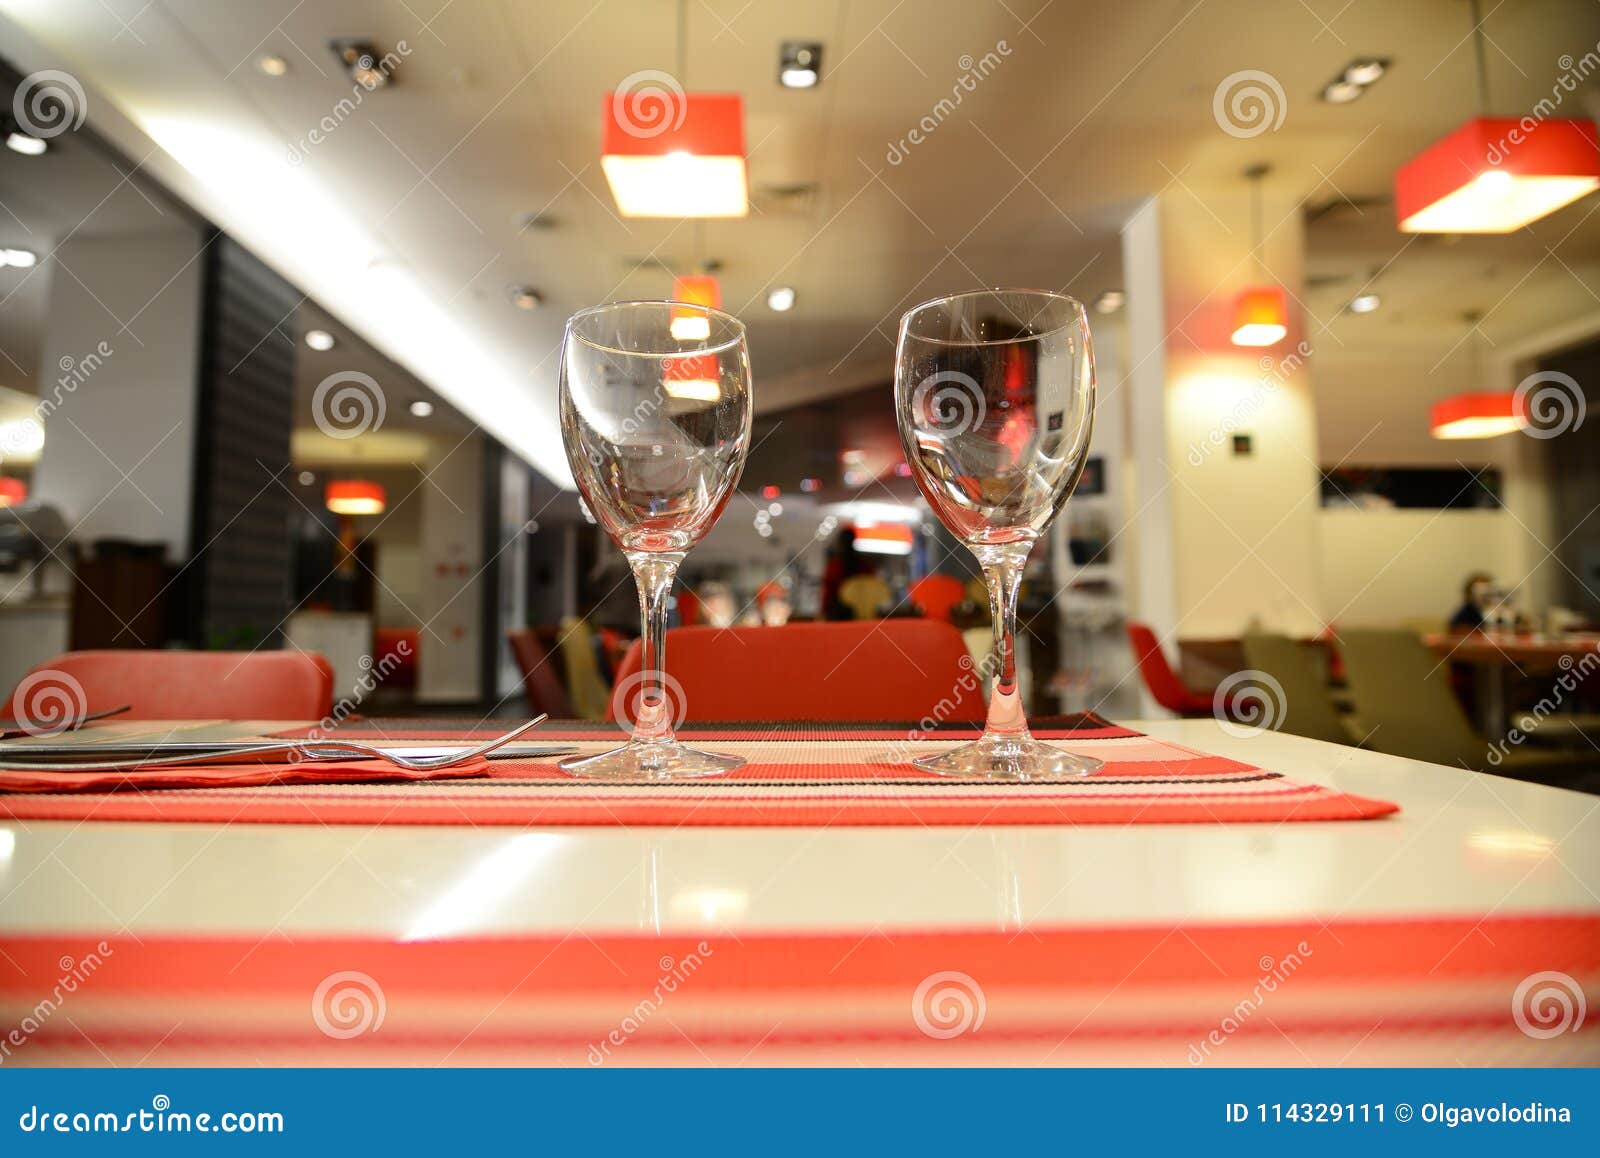 two glasses on table in a cafe